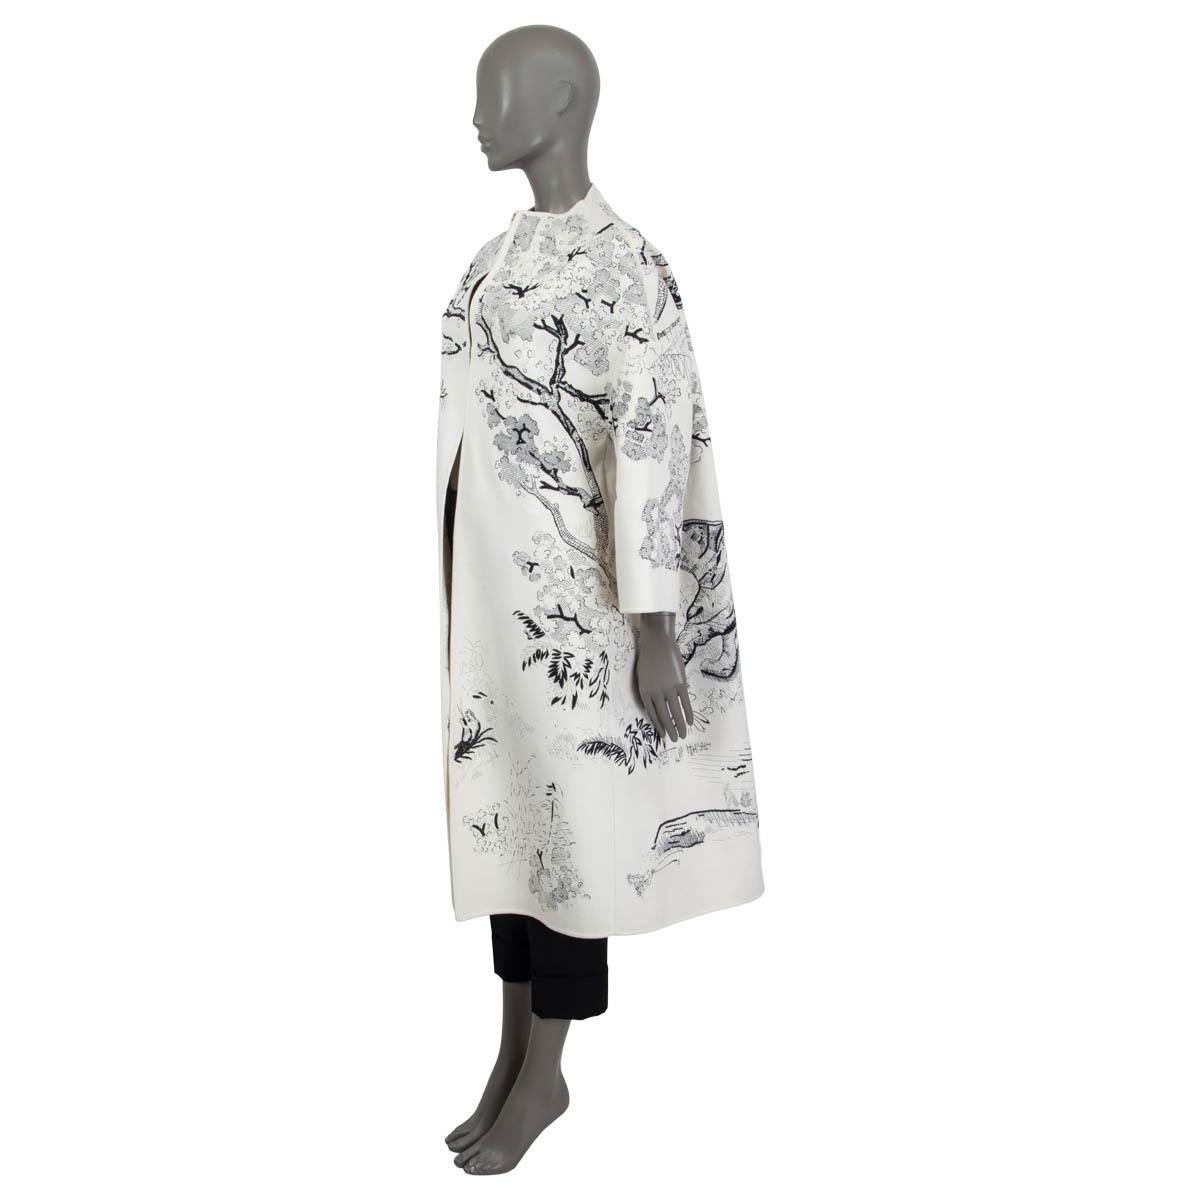 100% authentic Christian Dior embroidered coat in off-white and black wool (80%), rabbit hair (15%), cashmere (2%), nylon (2%) and elastane (1%). Features 3/4 sleeves and two slit pockets on the side. Opens with two hooks on the front. Unlined. Has